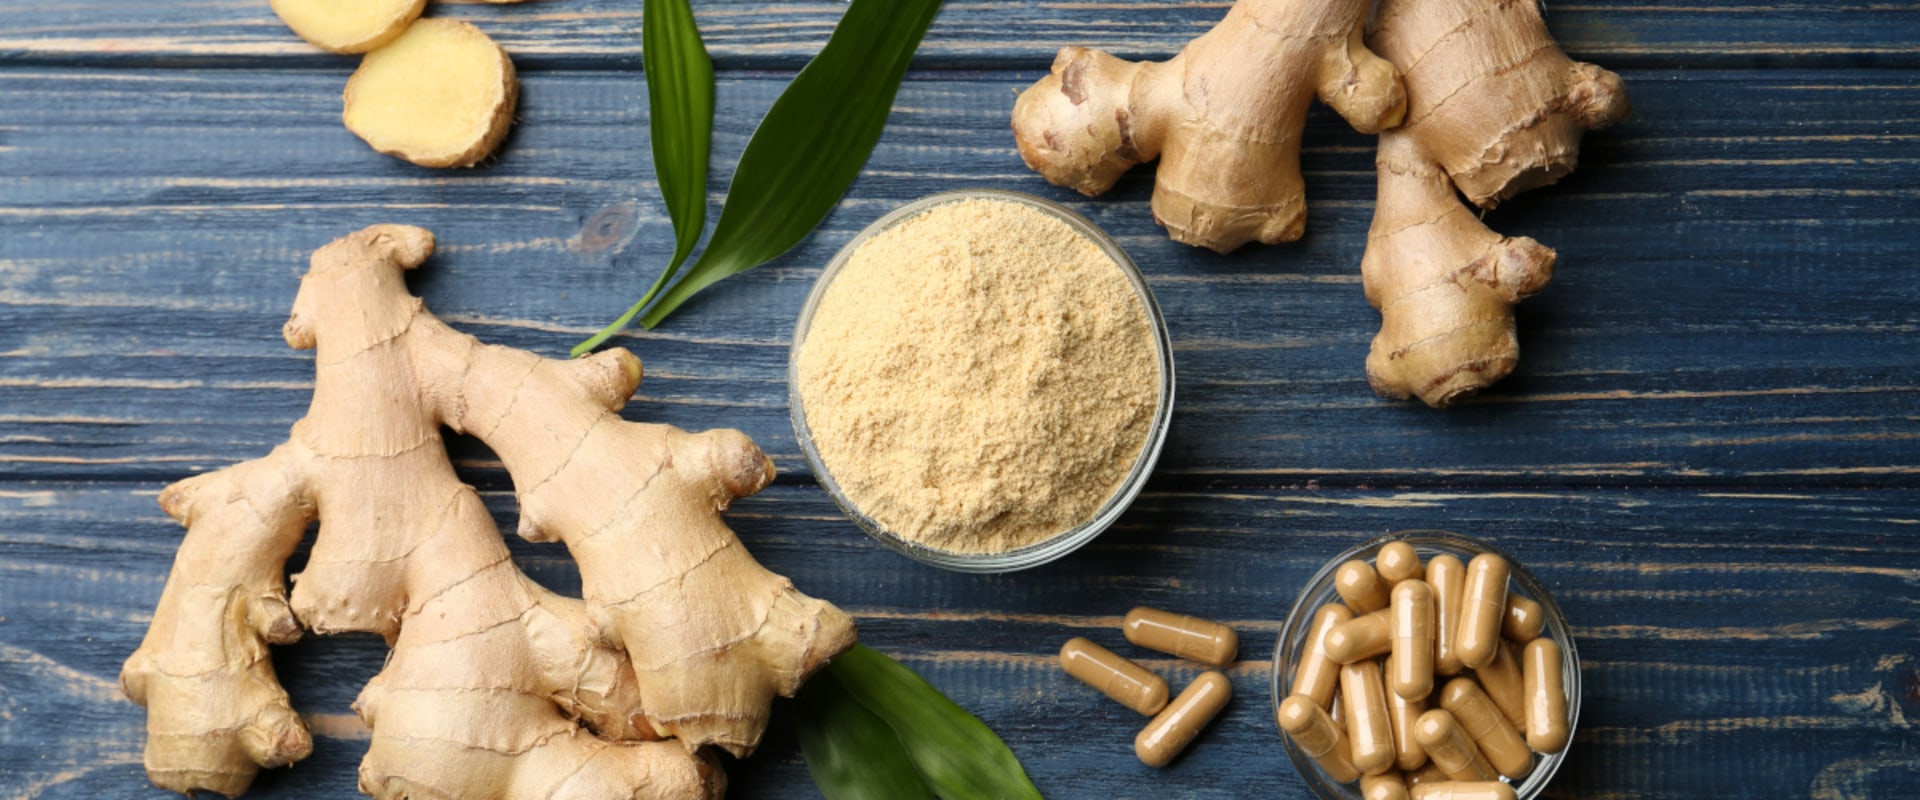 Ginger Supplements: Benefits, Dosage, and Side Effects